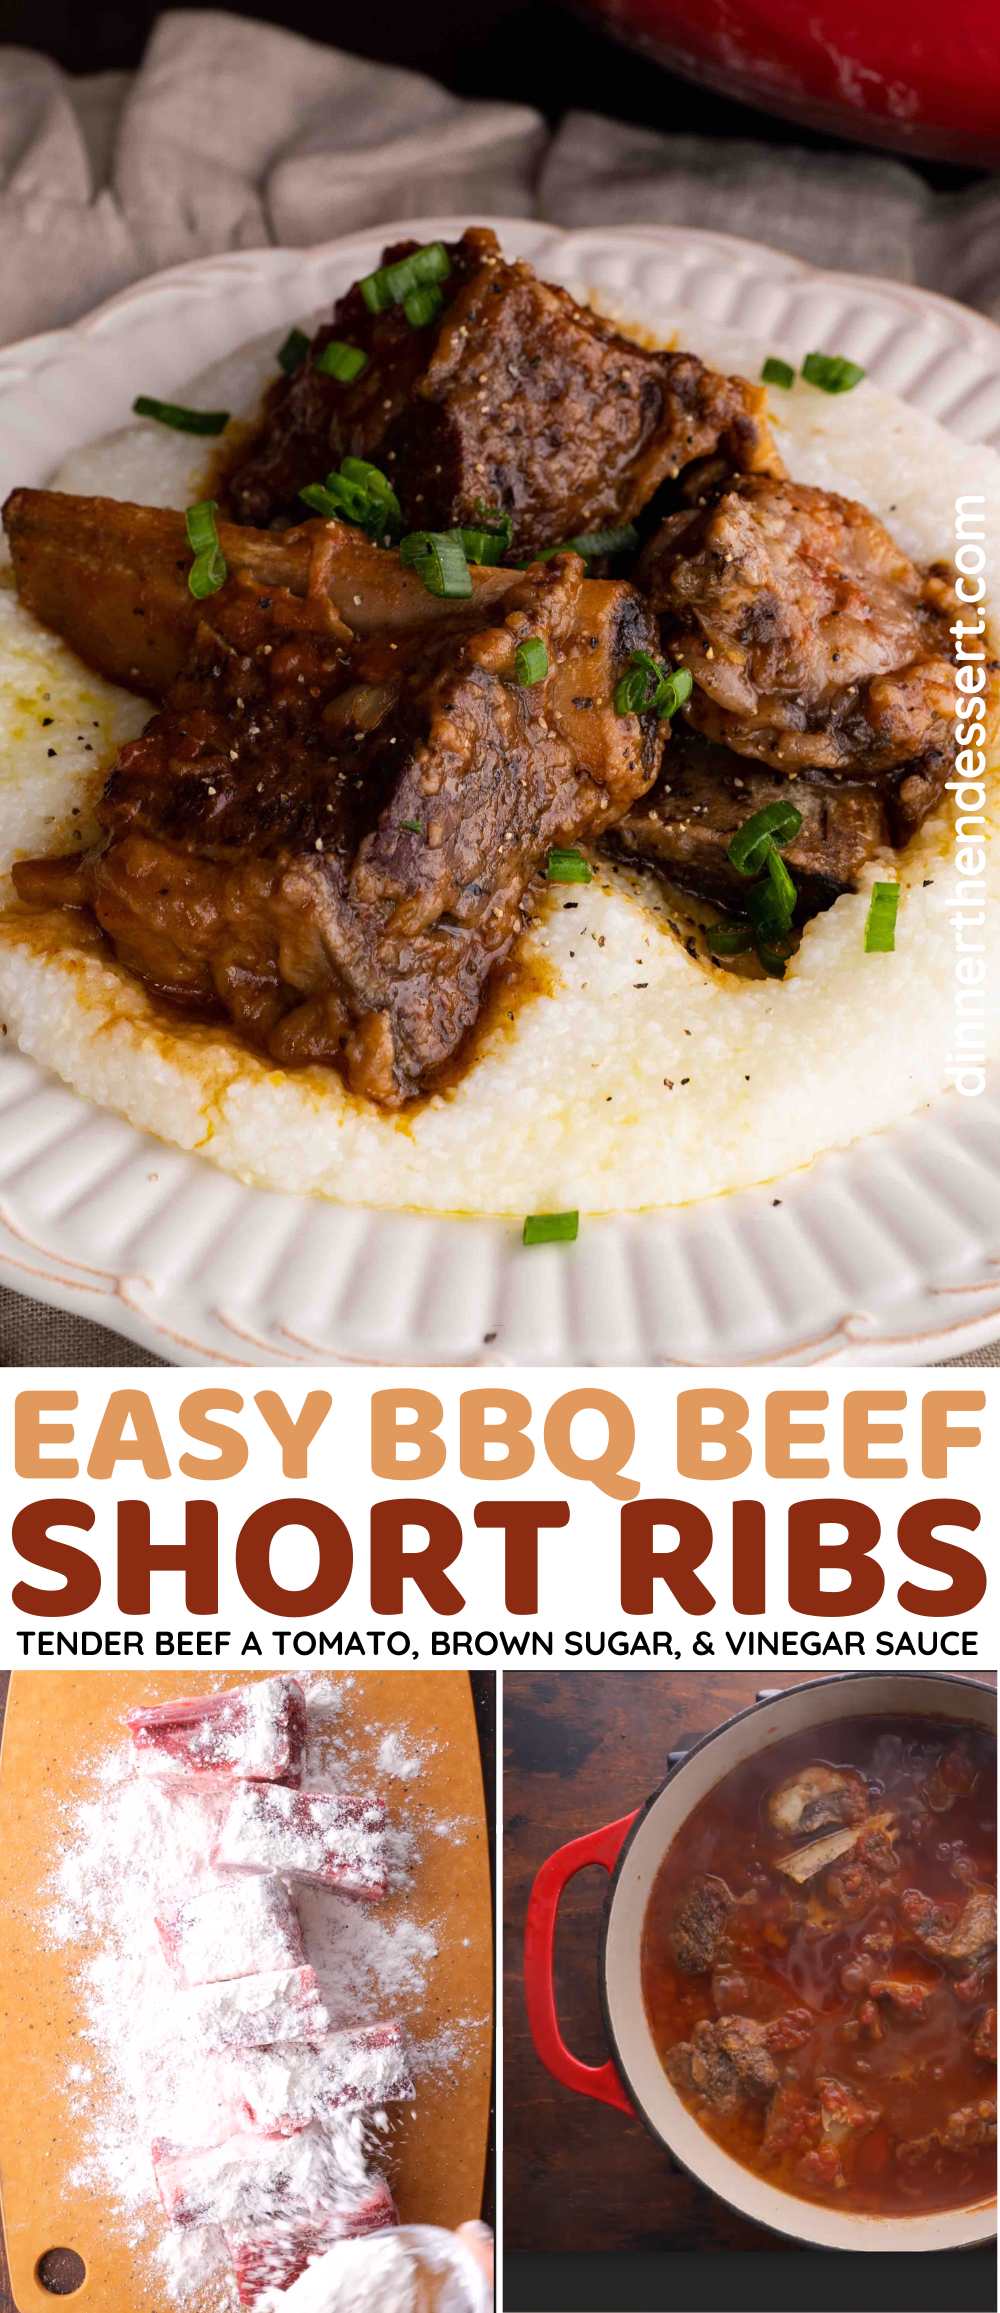 BBQ Beef Short Ribs collage